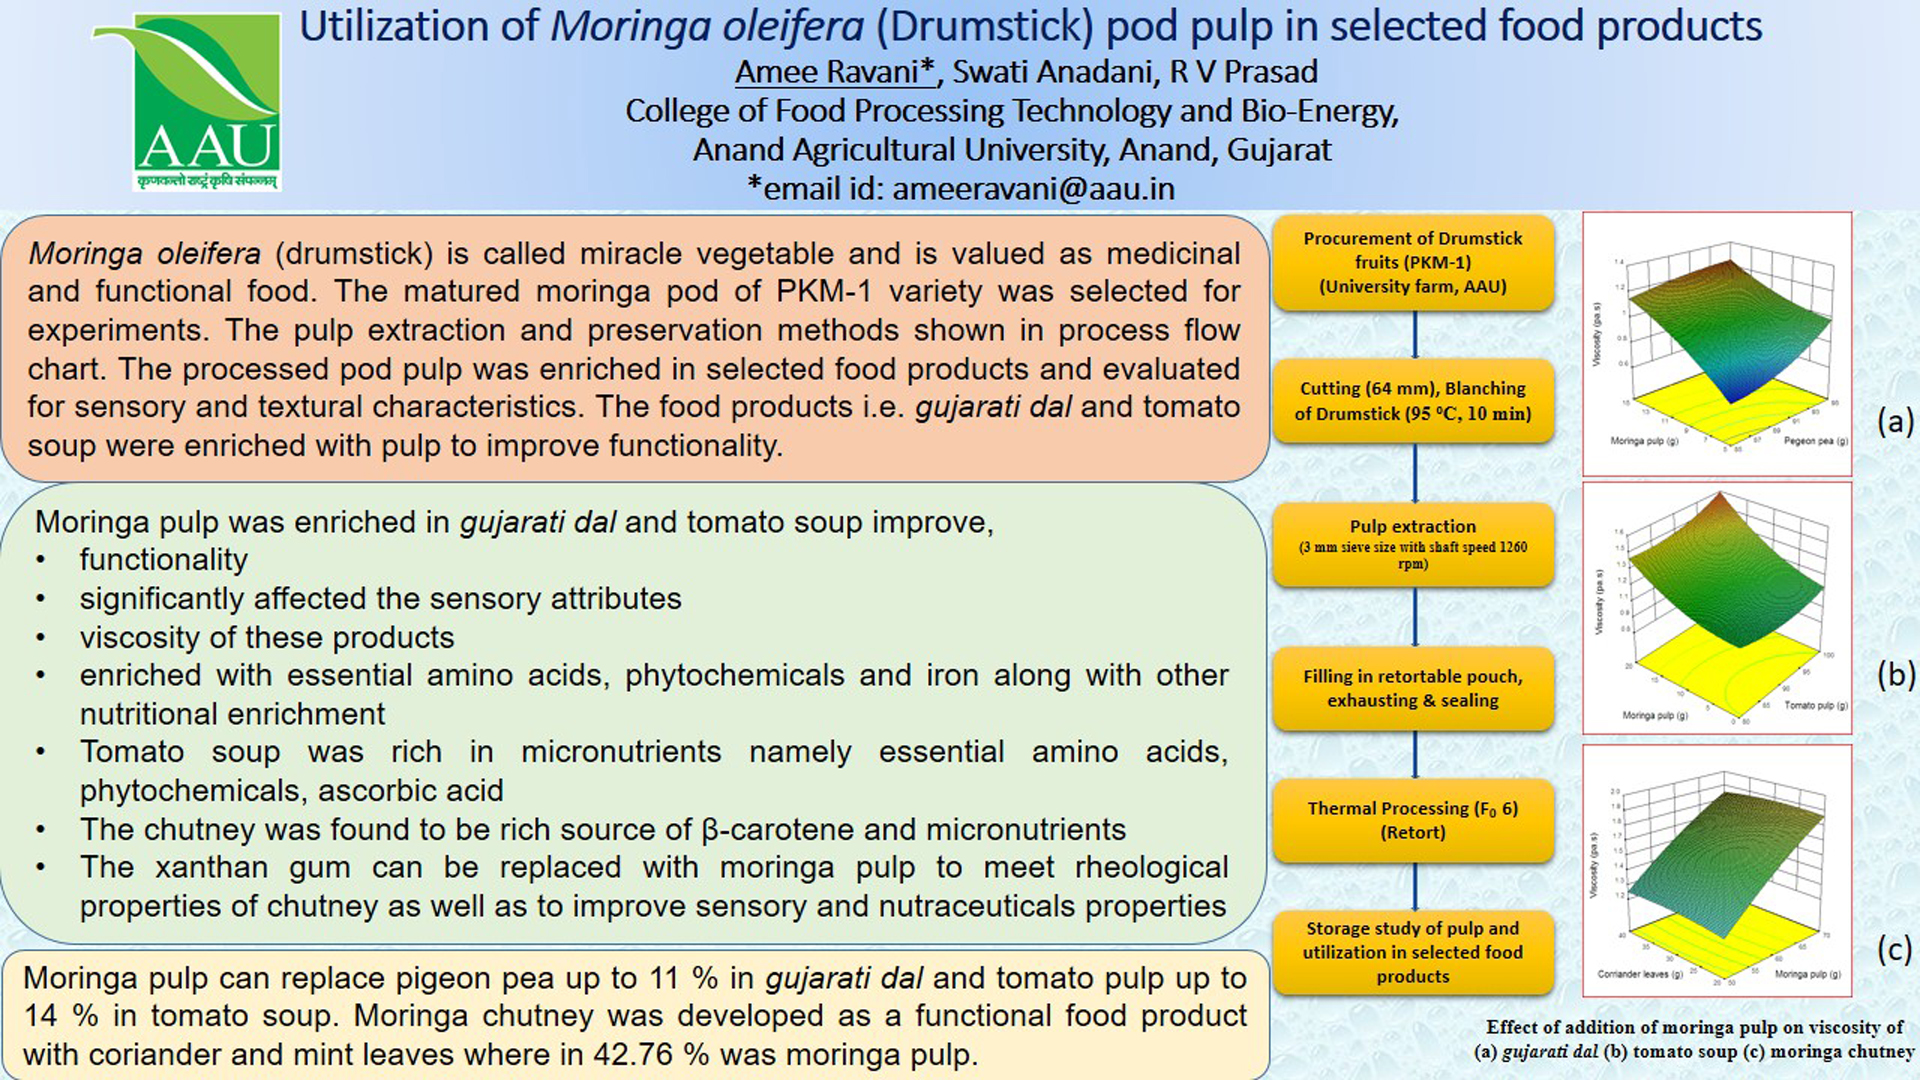 Utilization of Moringa oleifera (Drumstick) pod pulp in selected food products